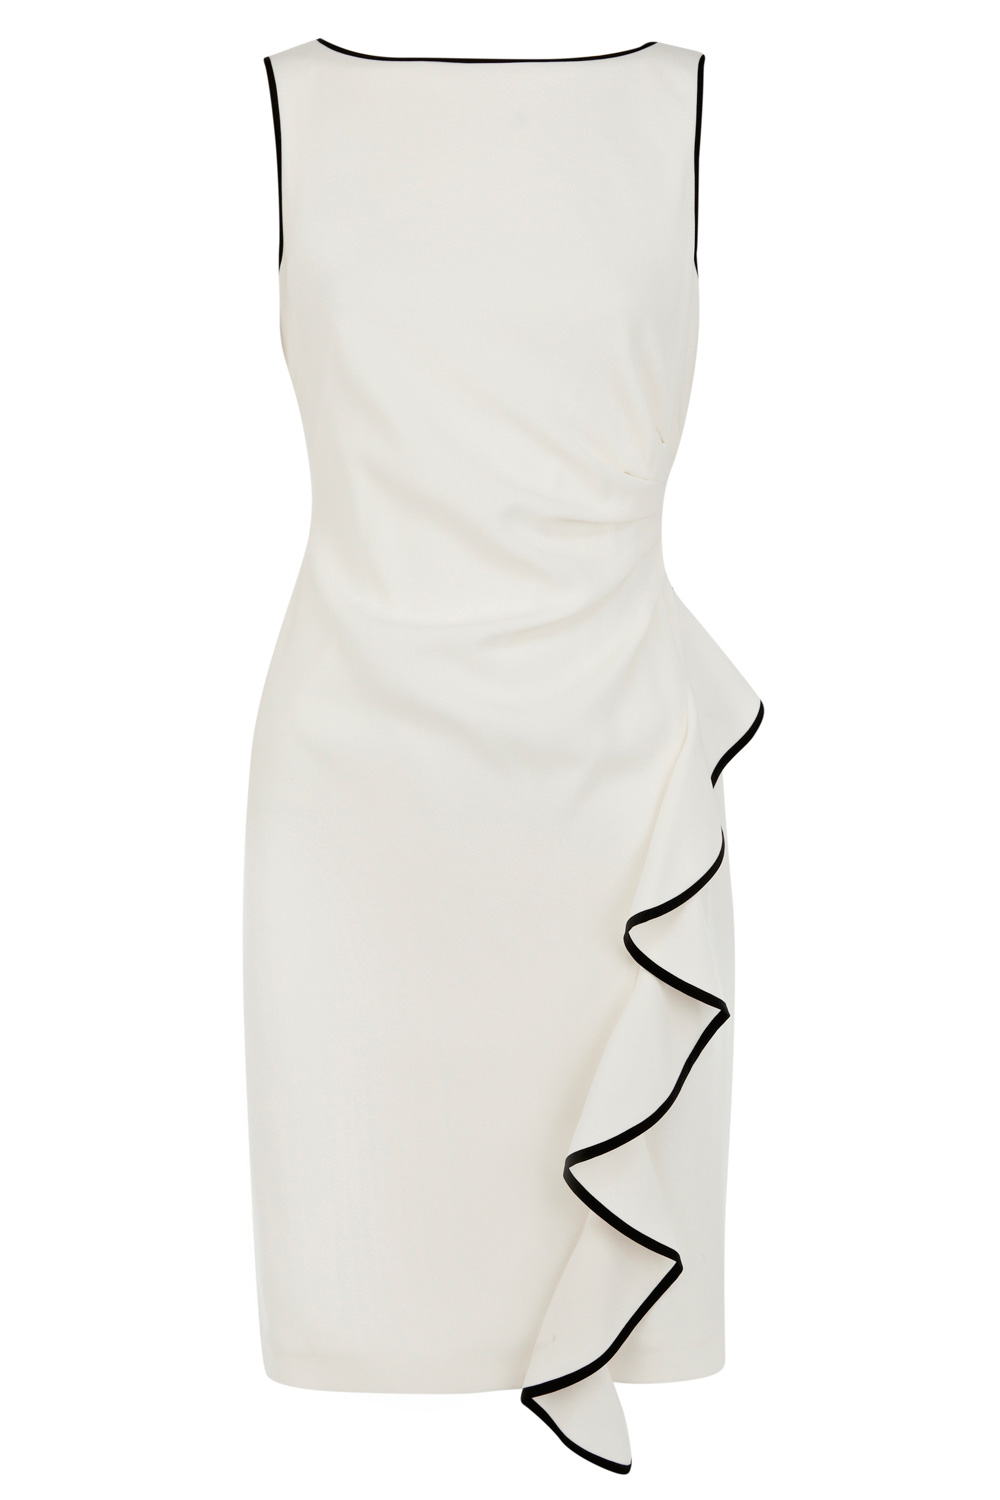 Lyst - Coast Tipped Irah Dress in White